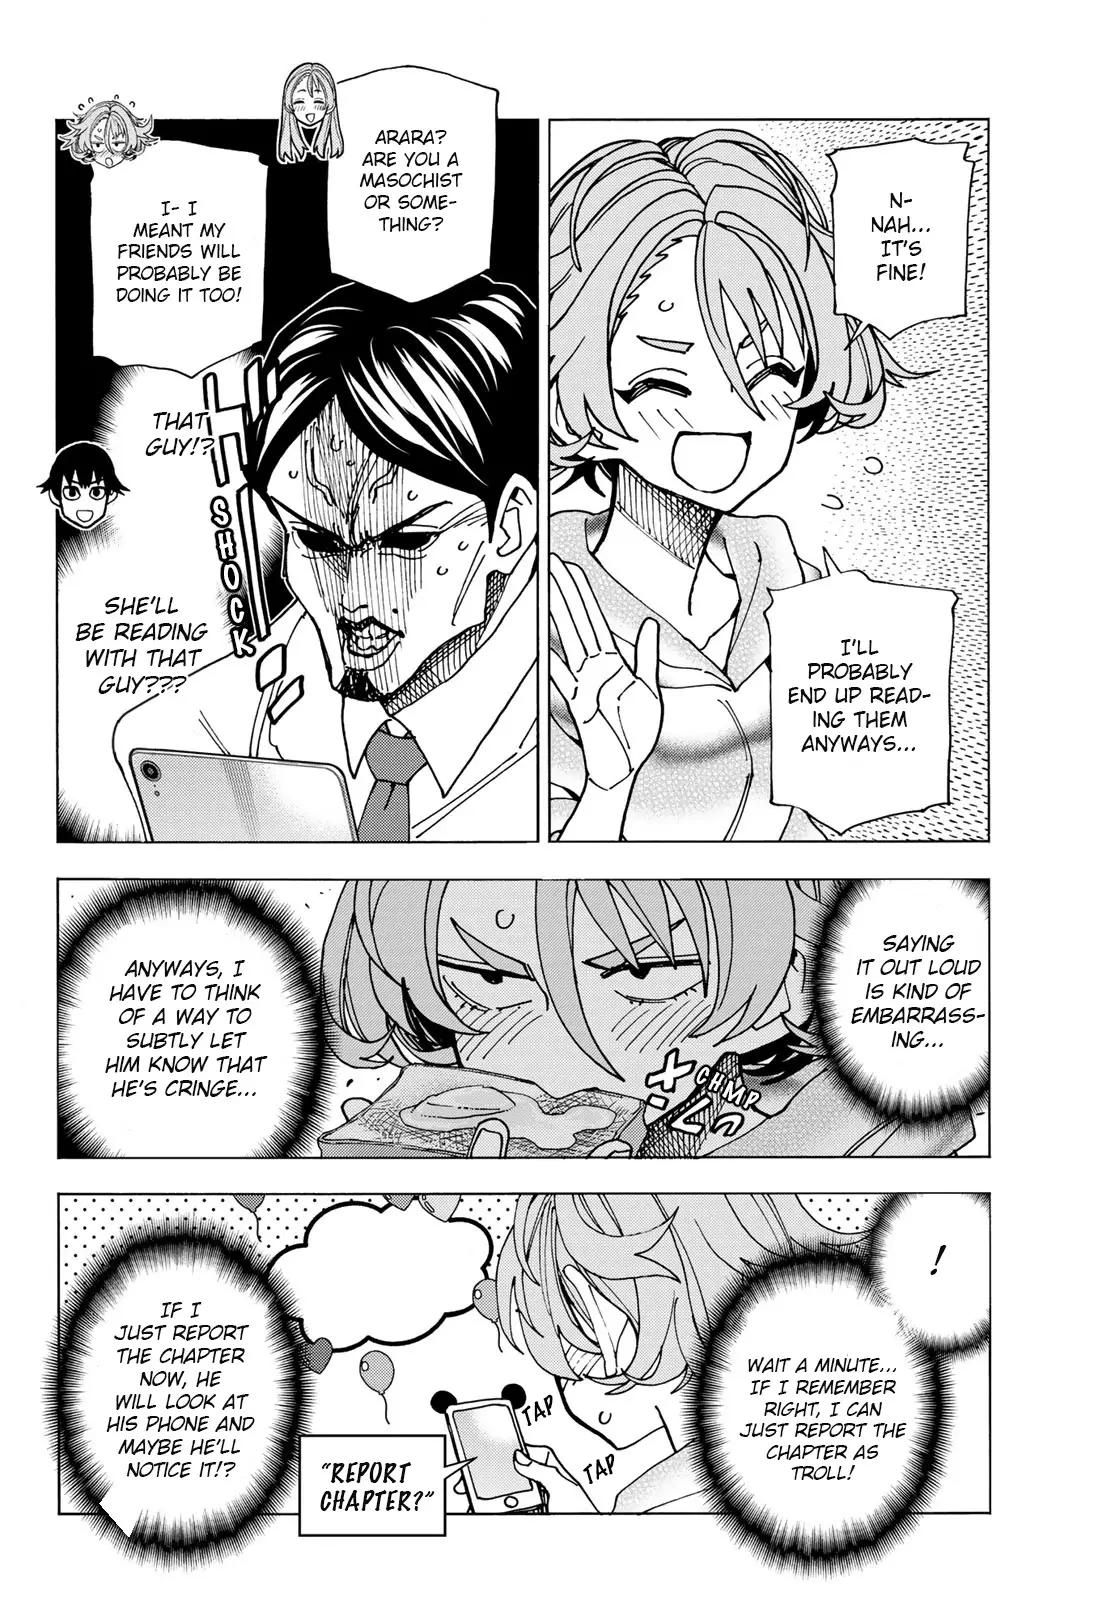 The Story Between A Dumb Prefect And A High School Girl With An Inappropriate Skirt Length - 68 page 3-8a556f3f